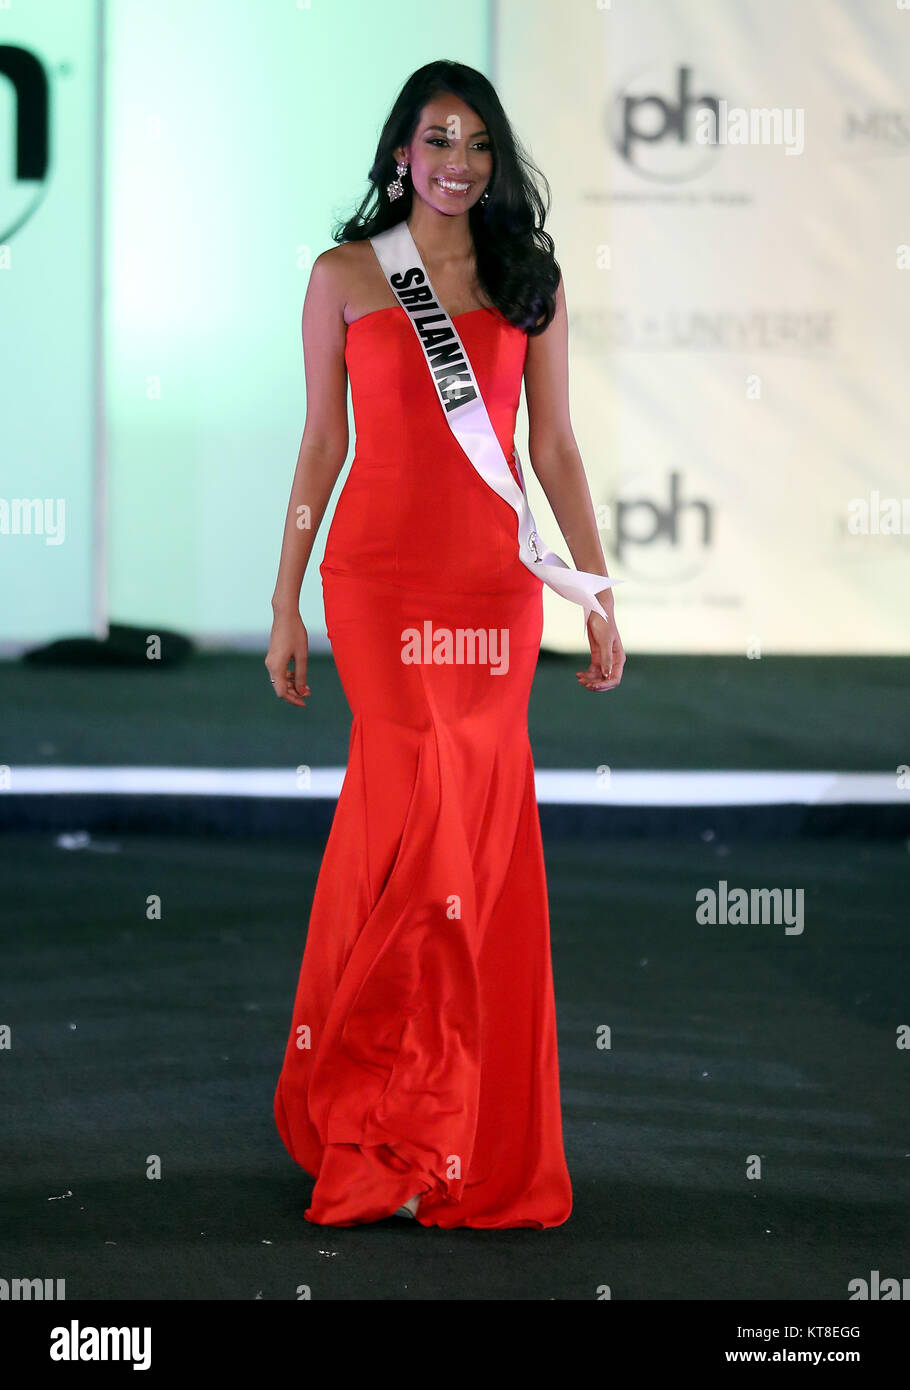 Miss Universe Preliminary Competition at Hollywood Resort